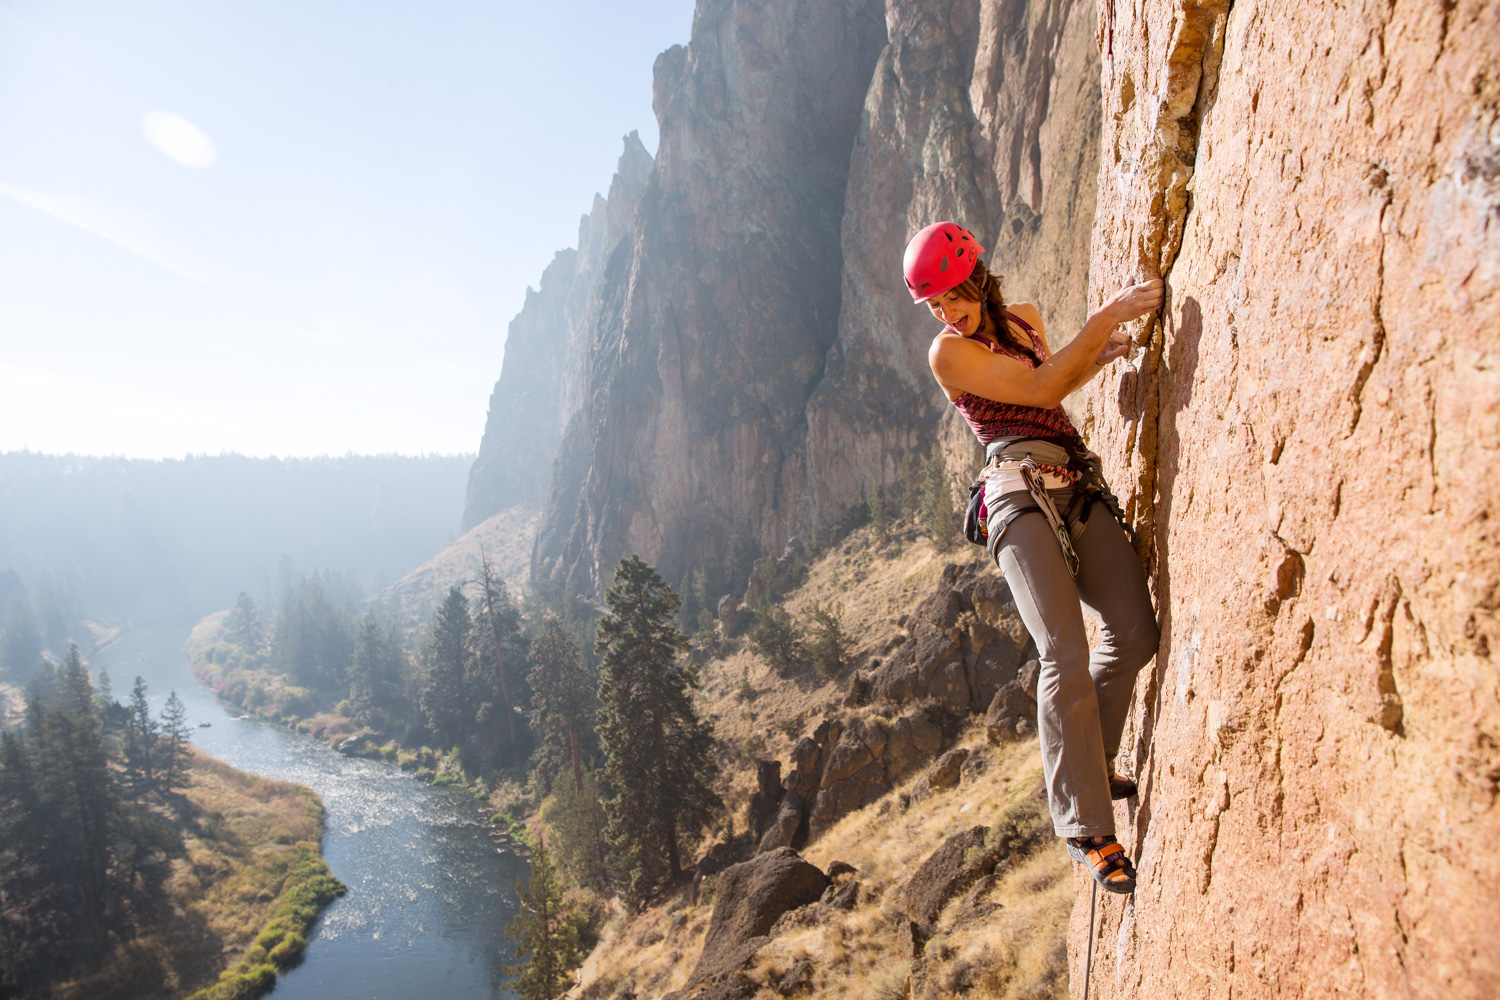  Lisa Chulich chatting with her belayer. Smith Rock, OR 